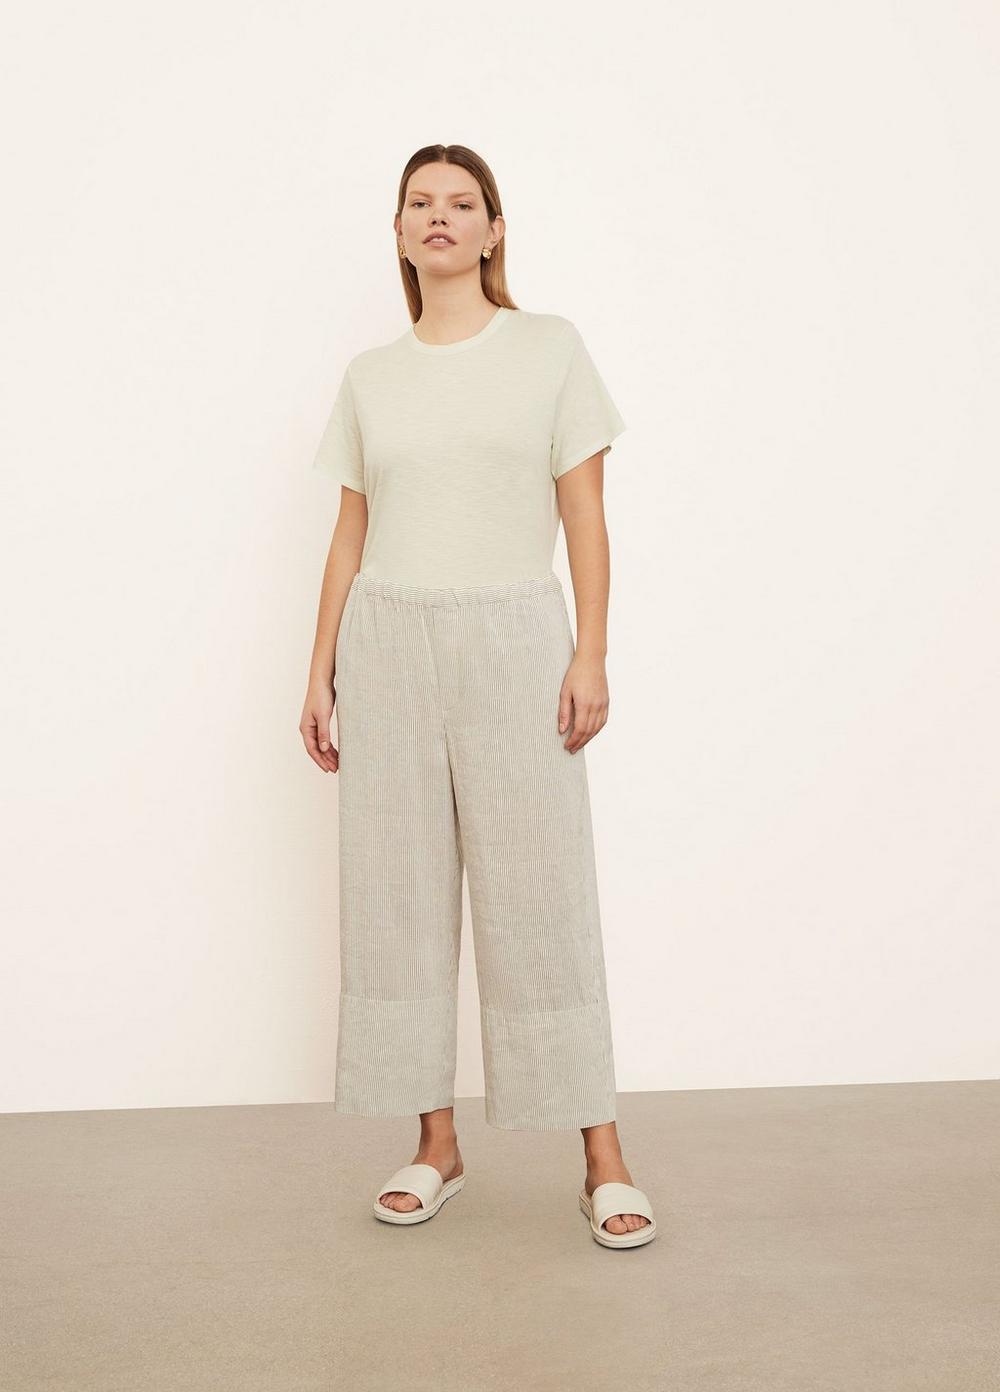 Vince Extended | Striped Pull On Cropped Pant in White/Black | Vince Unfold